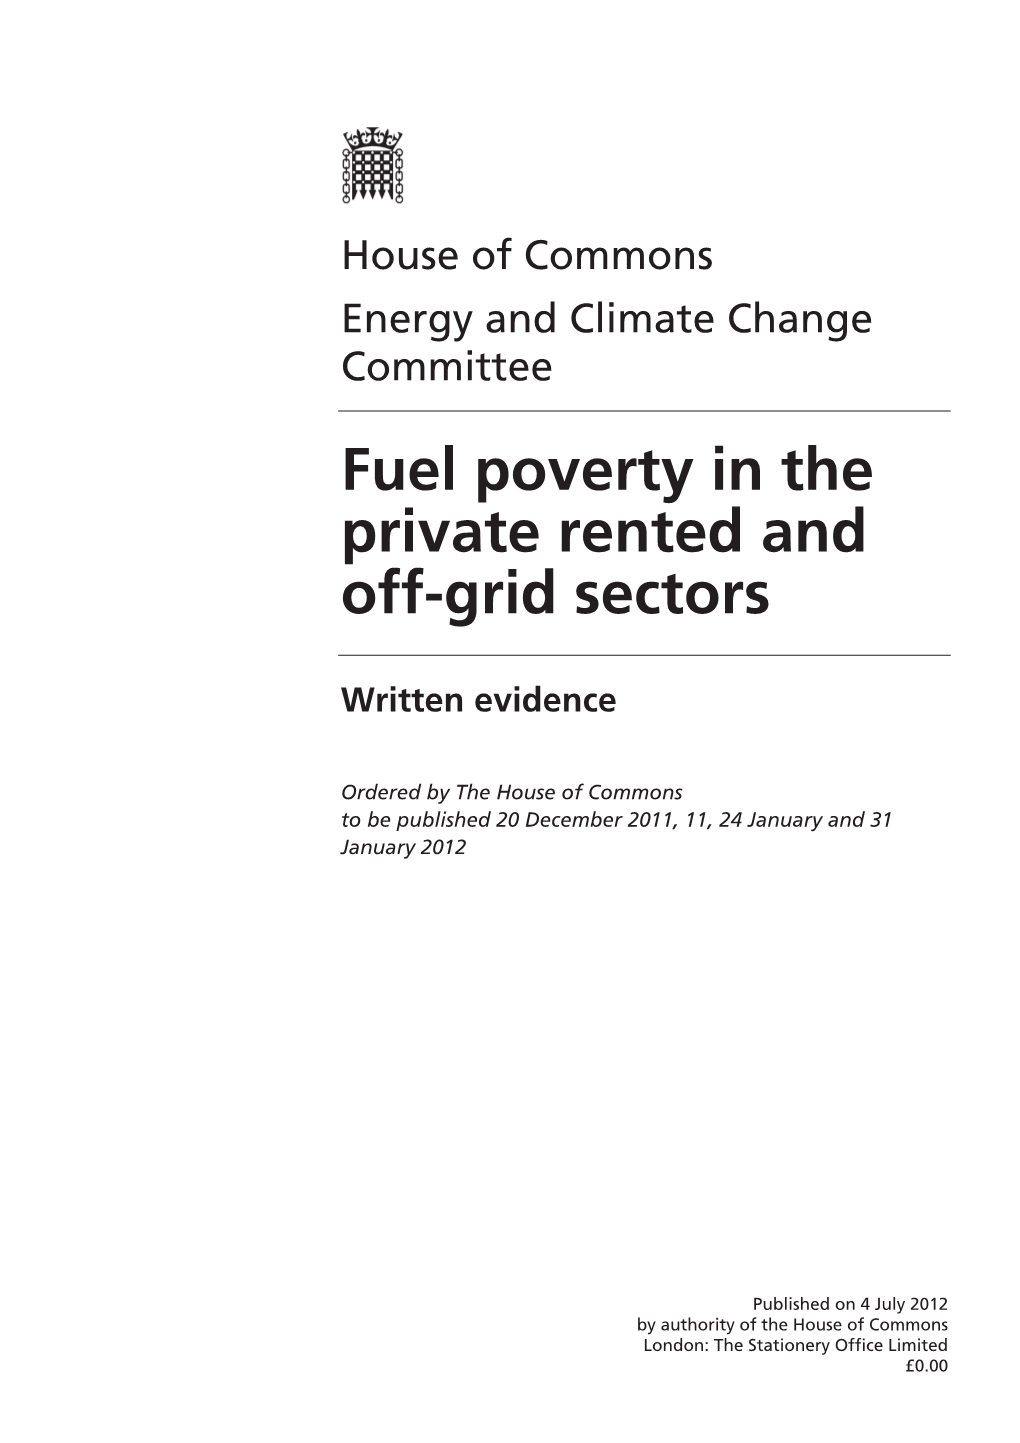 Fuel Poverty in the Private Rented and Off-Grid Sectors